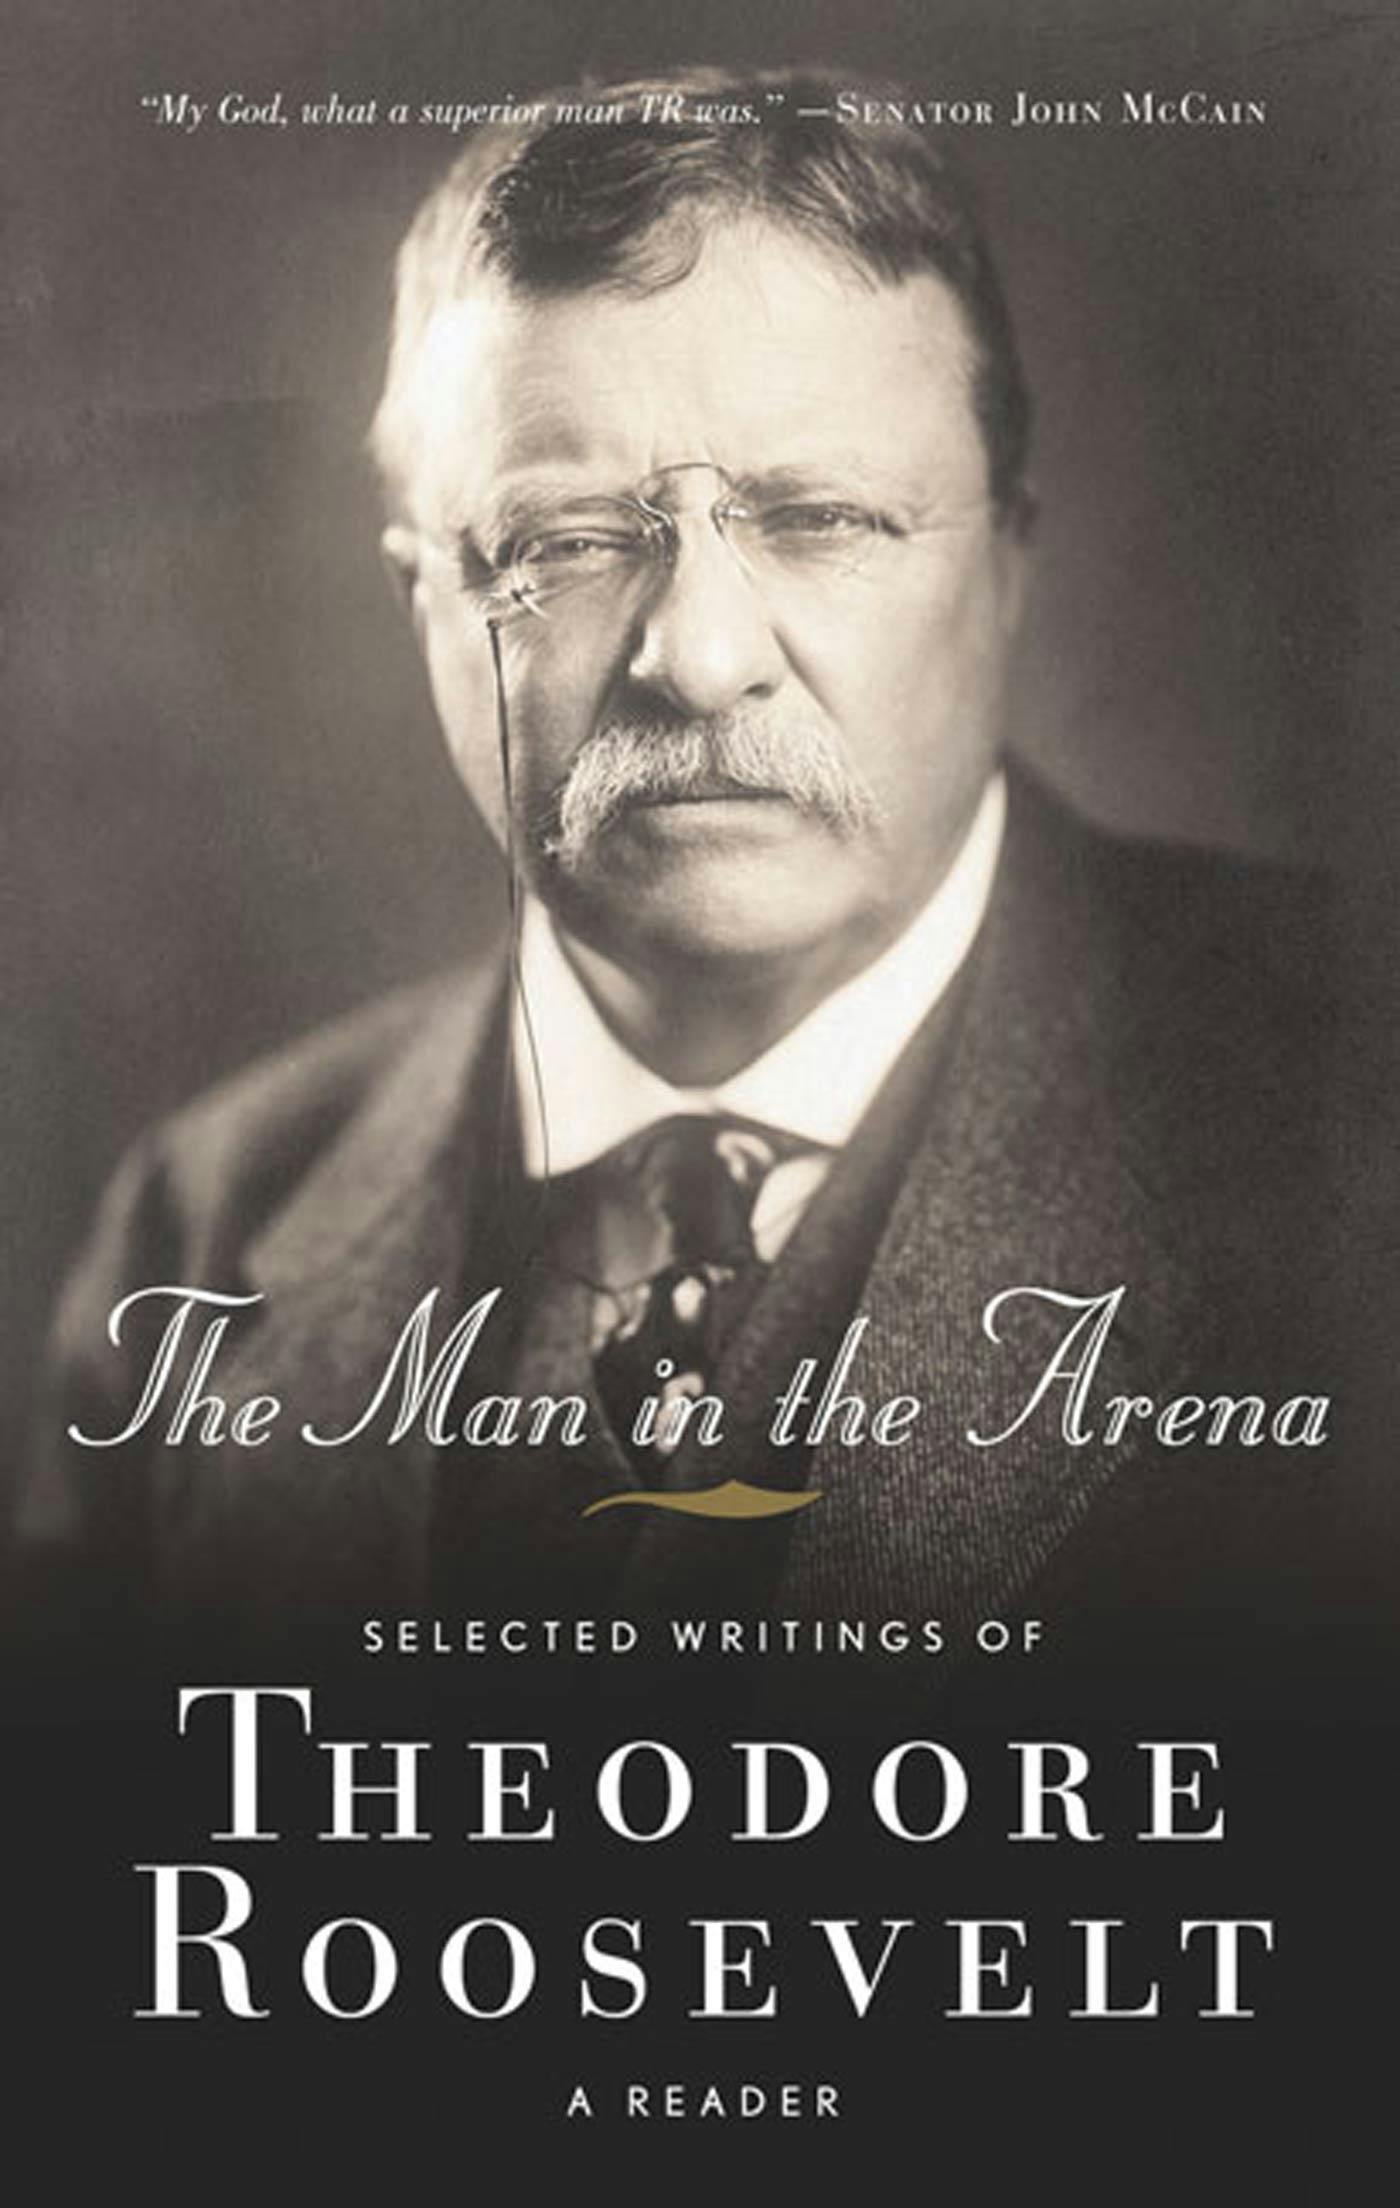 Cover for the book titled as: The Man in the Arena